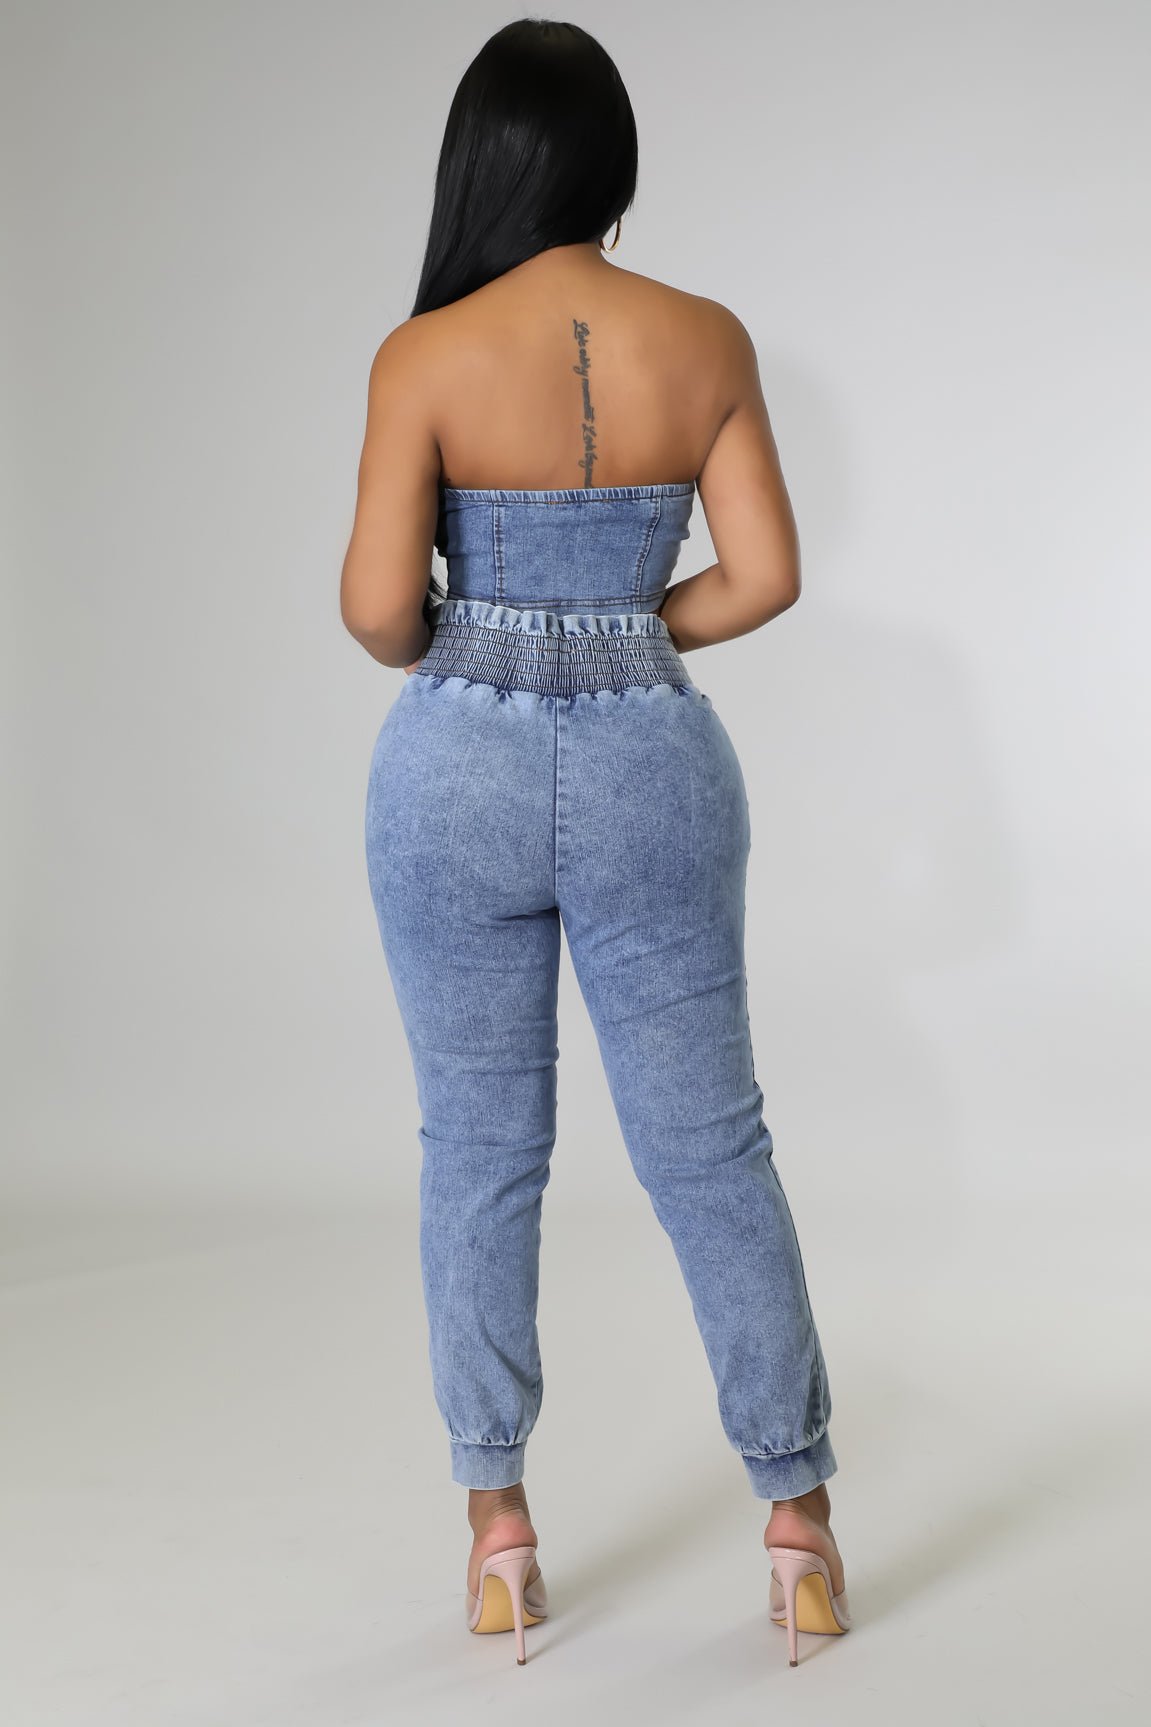 Just Wanna Be Your Girl Pants Set (7352359288993)